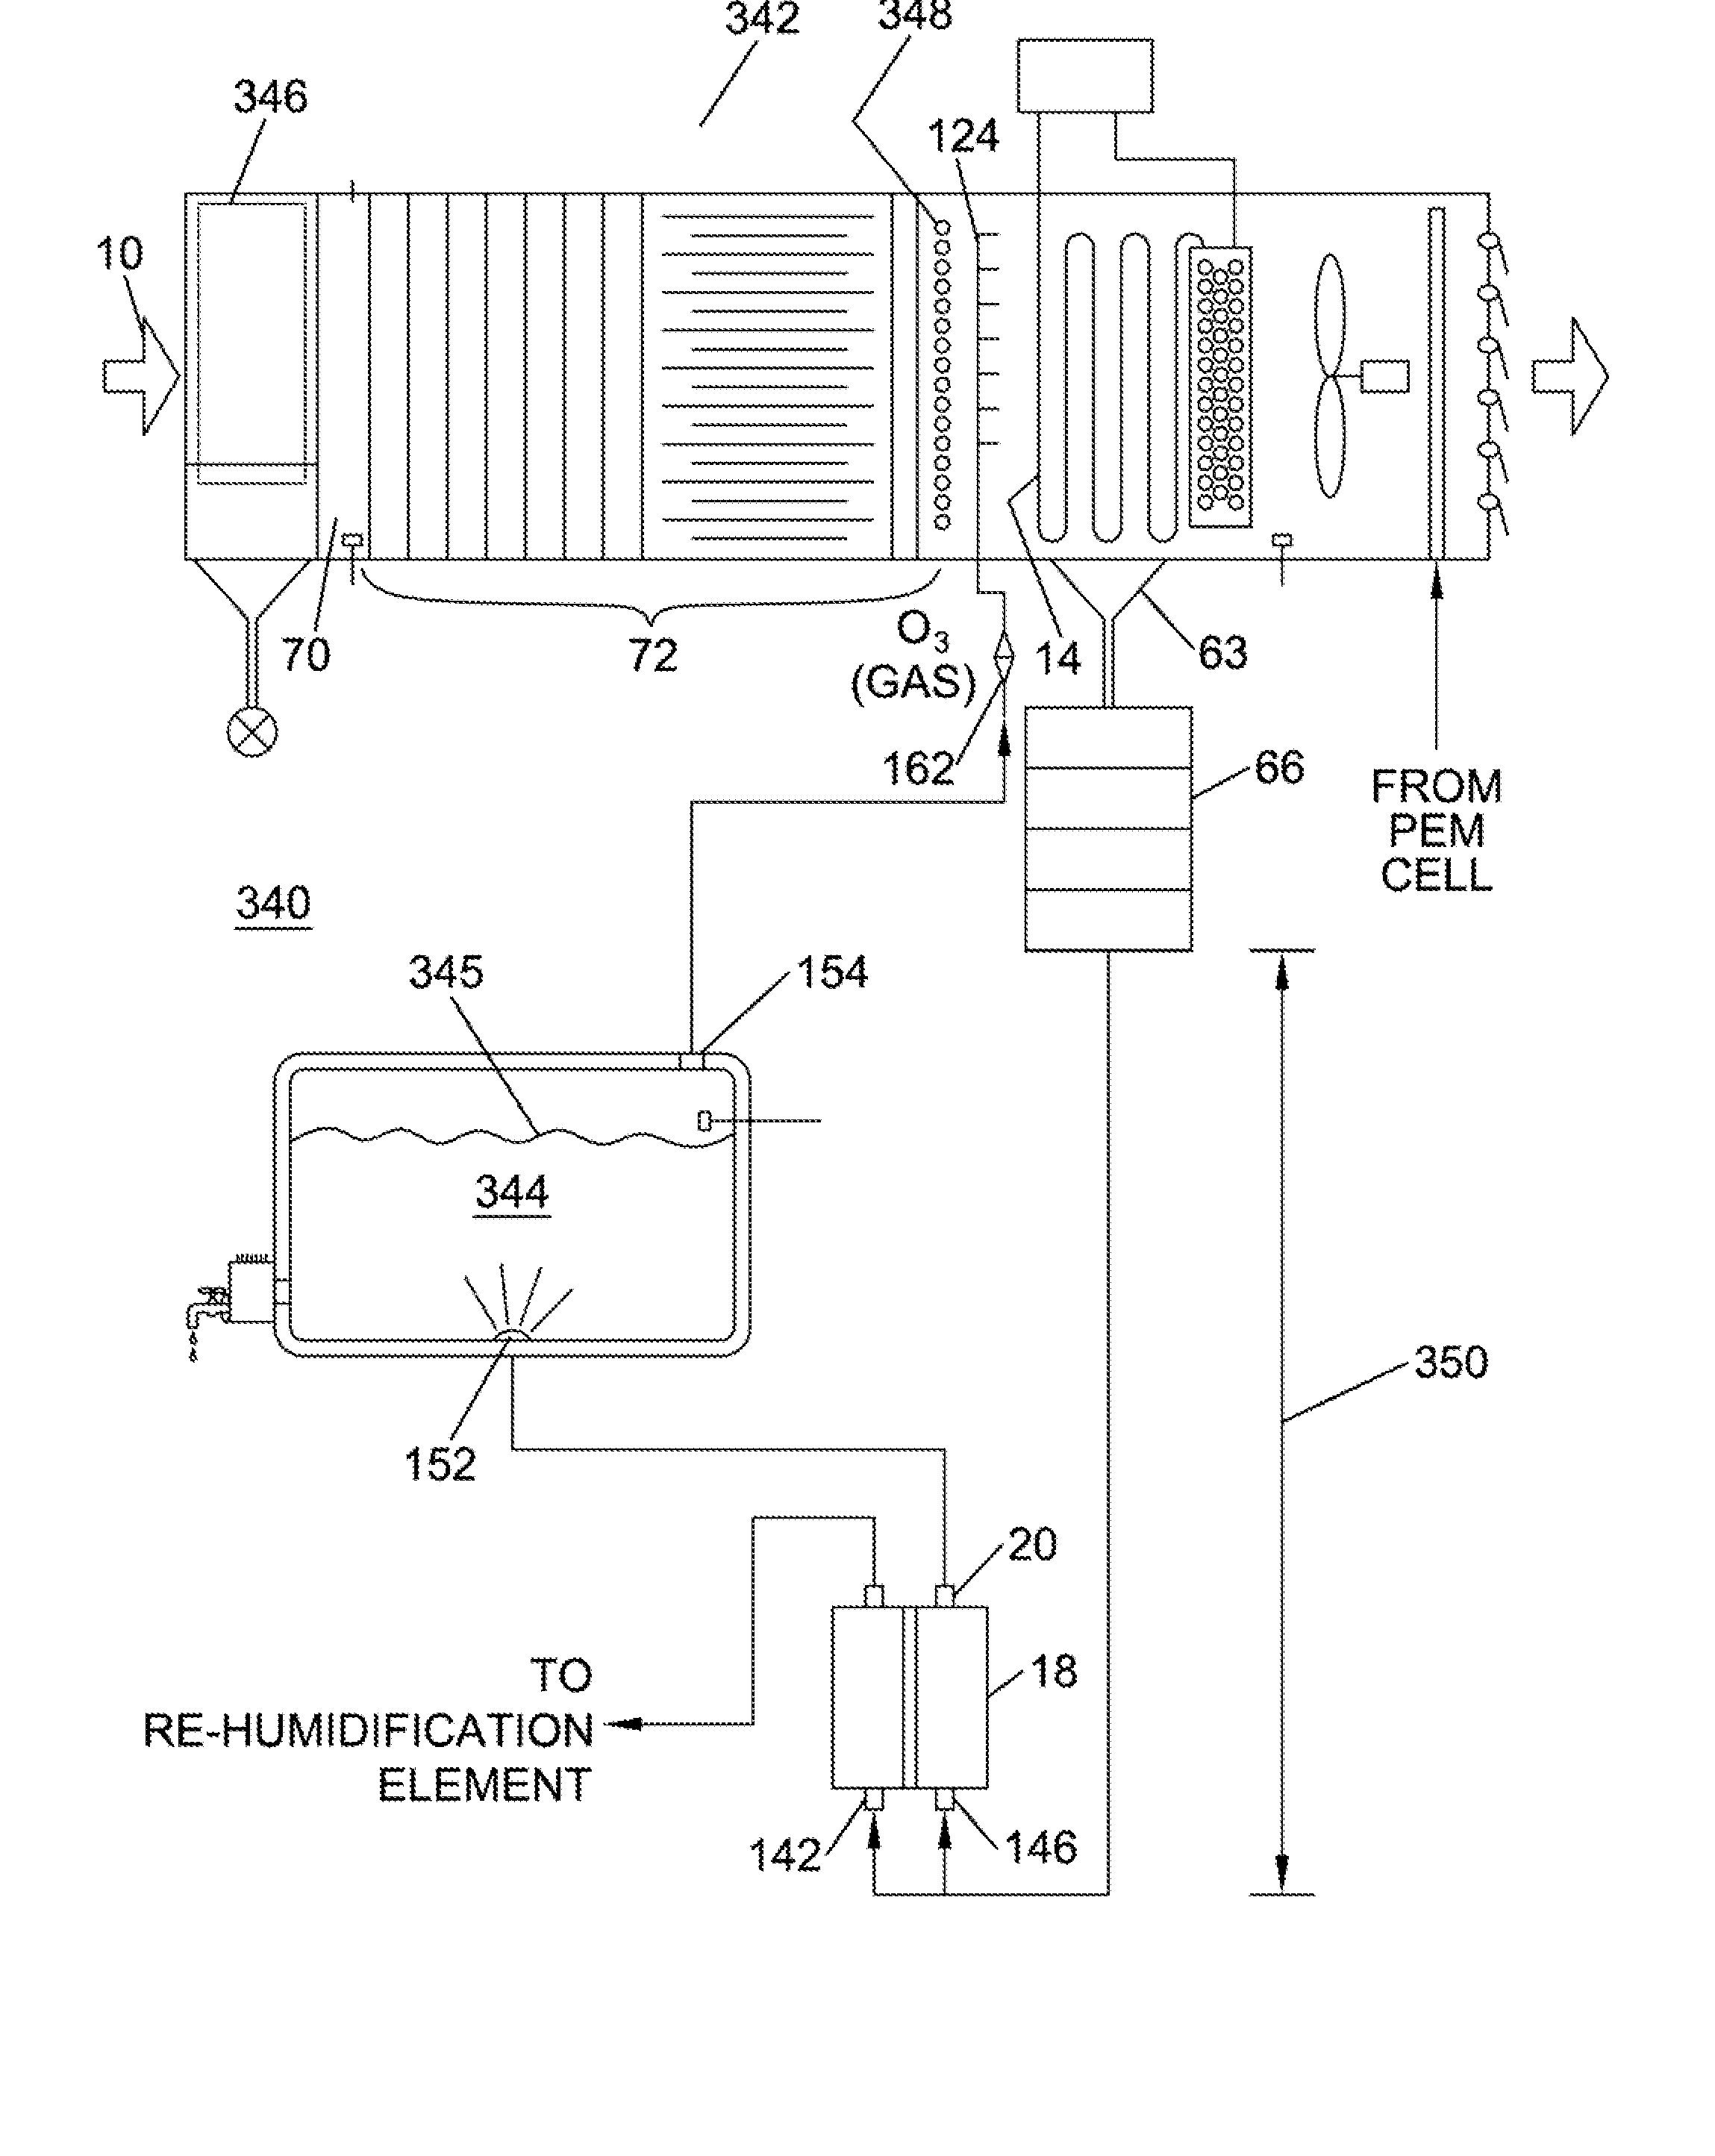 Apparatus and Method For Generating Water From an Air Stream